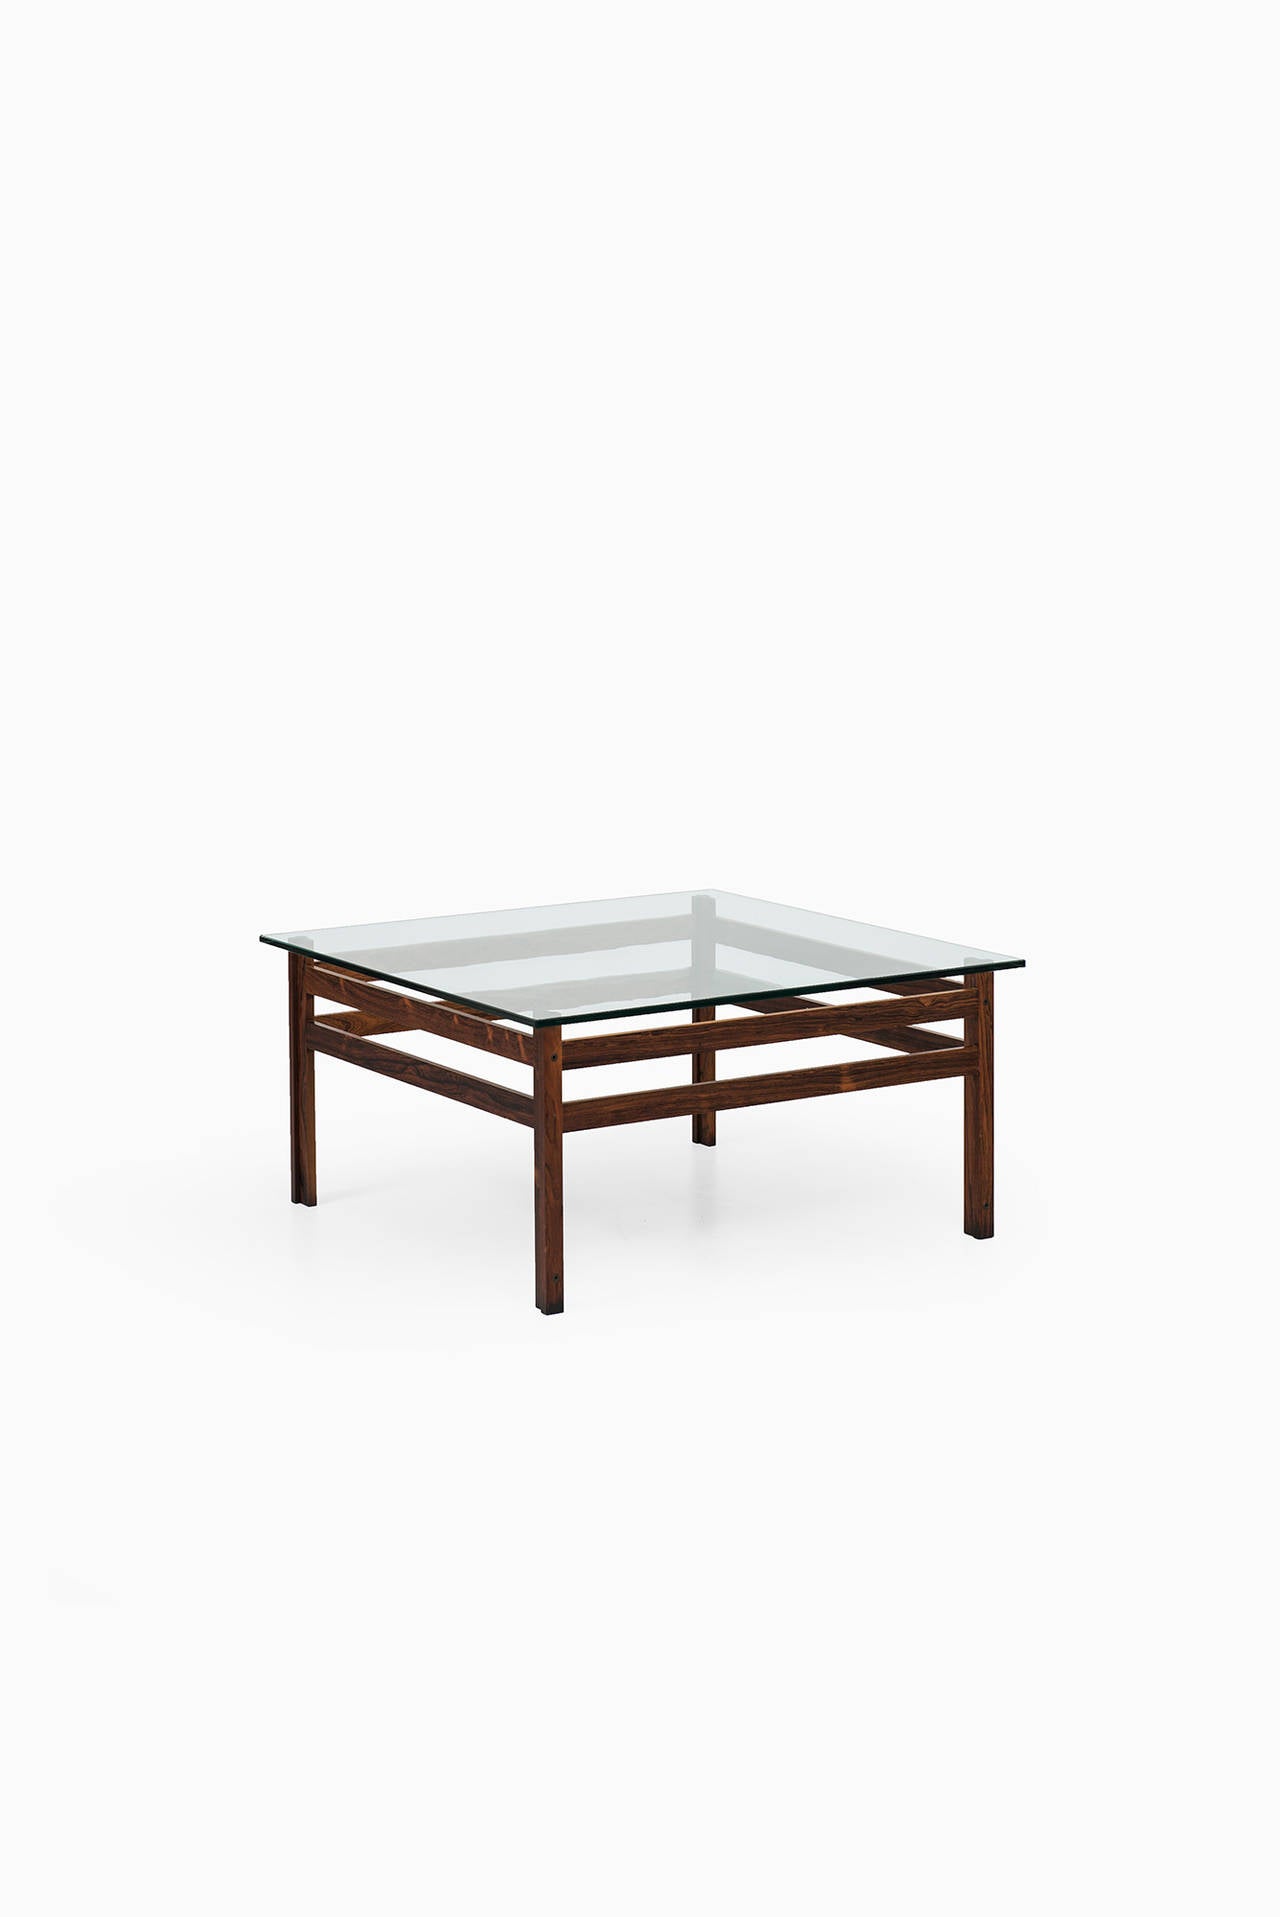 Norwegian Mid century coffee table in rosewood with thick glass top